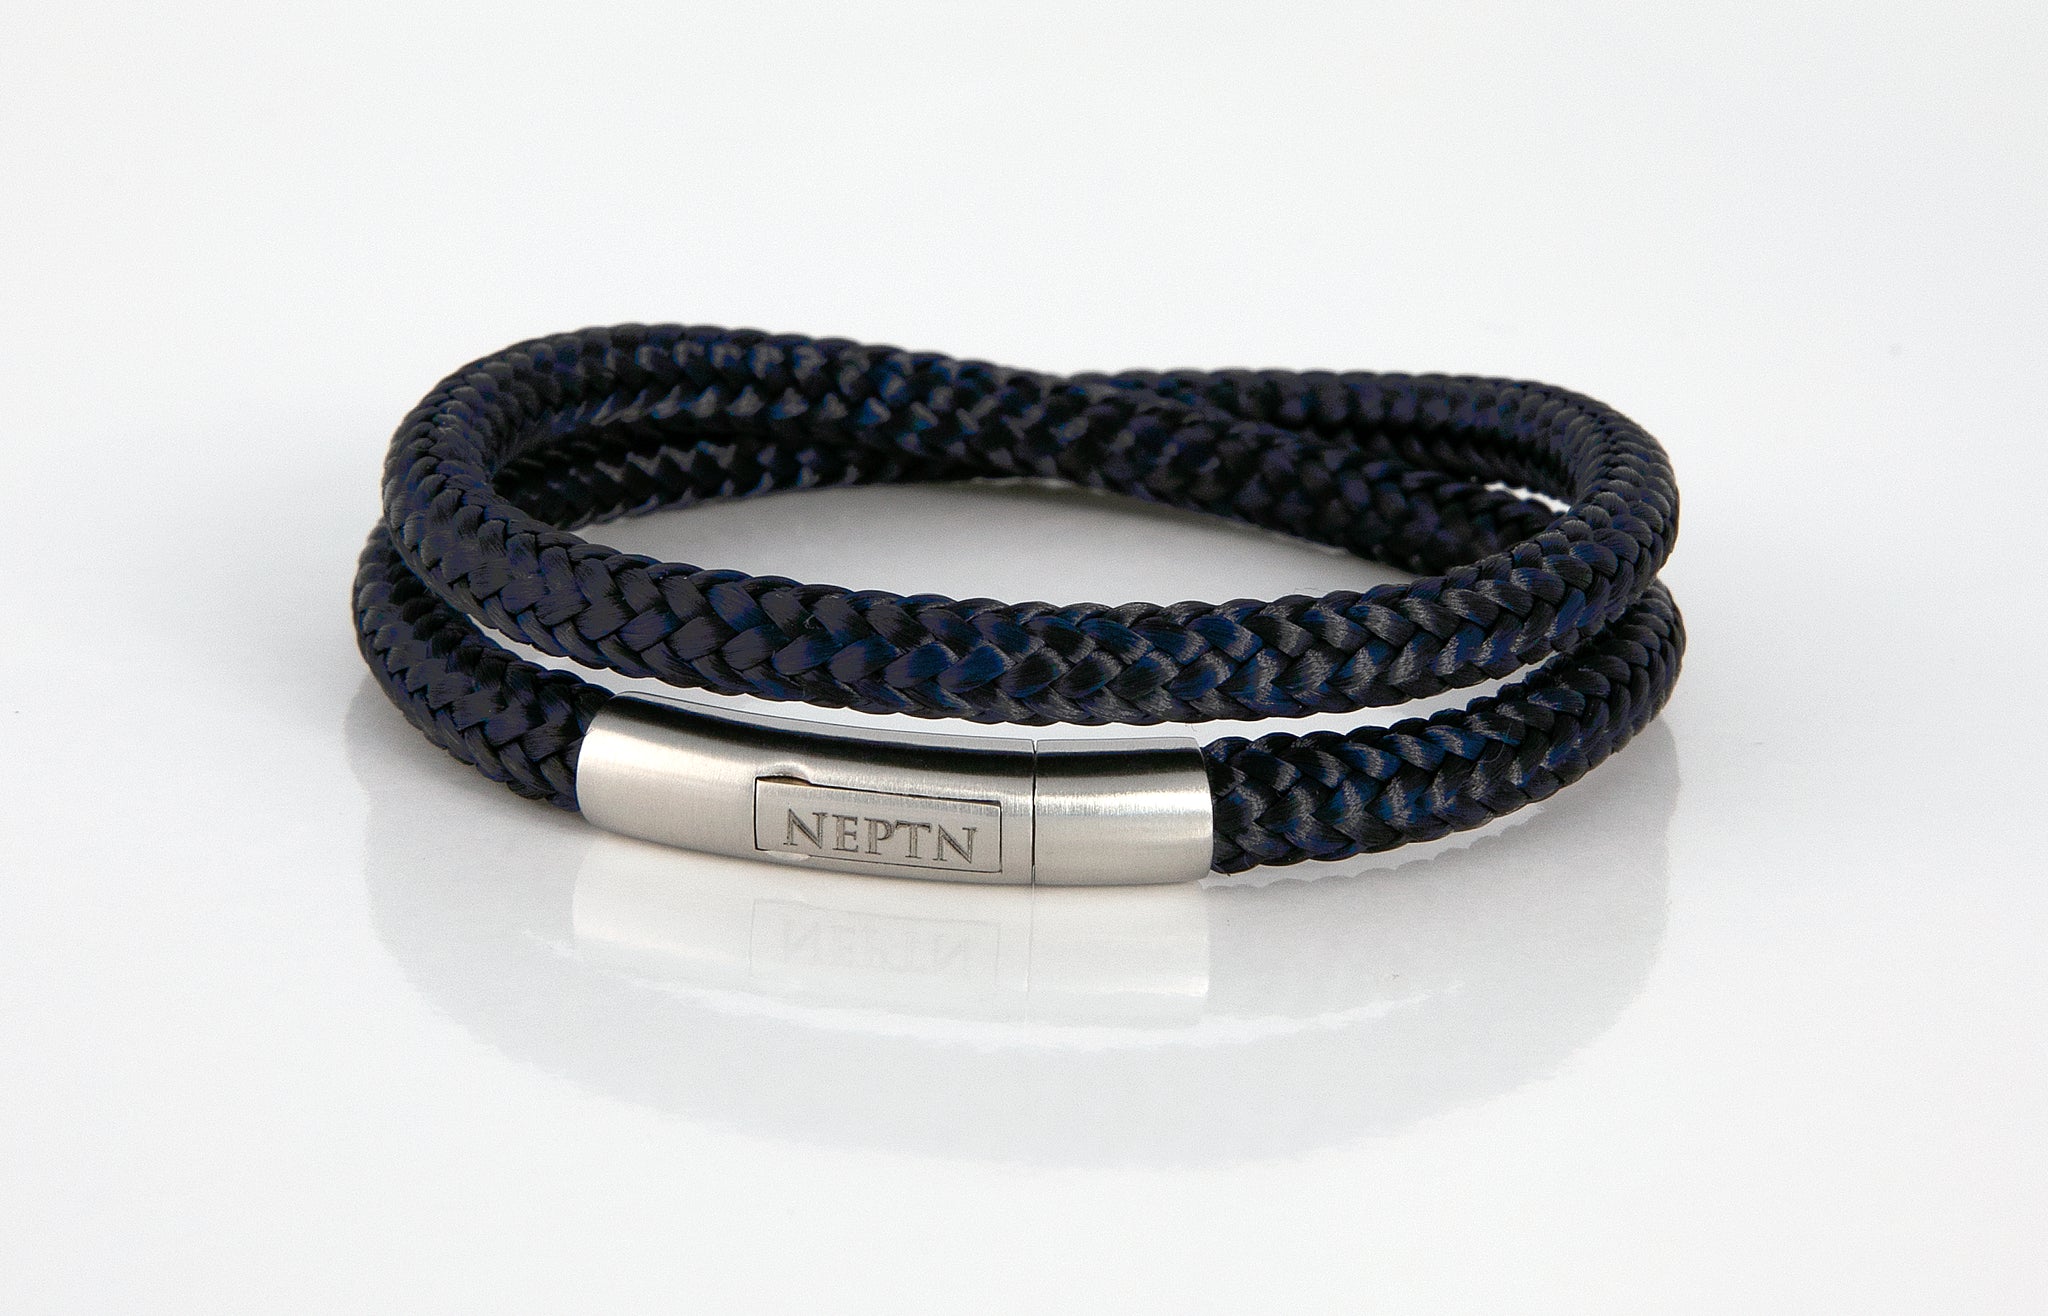  NEPTN Leather Bracelet Sailor Pro Steel 8 - Black Leather  Braided, Size Large (Wrist Circumference 7-7.5): Clothing, Shoes & Jewelry